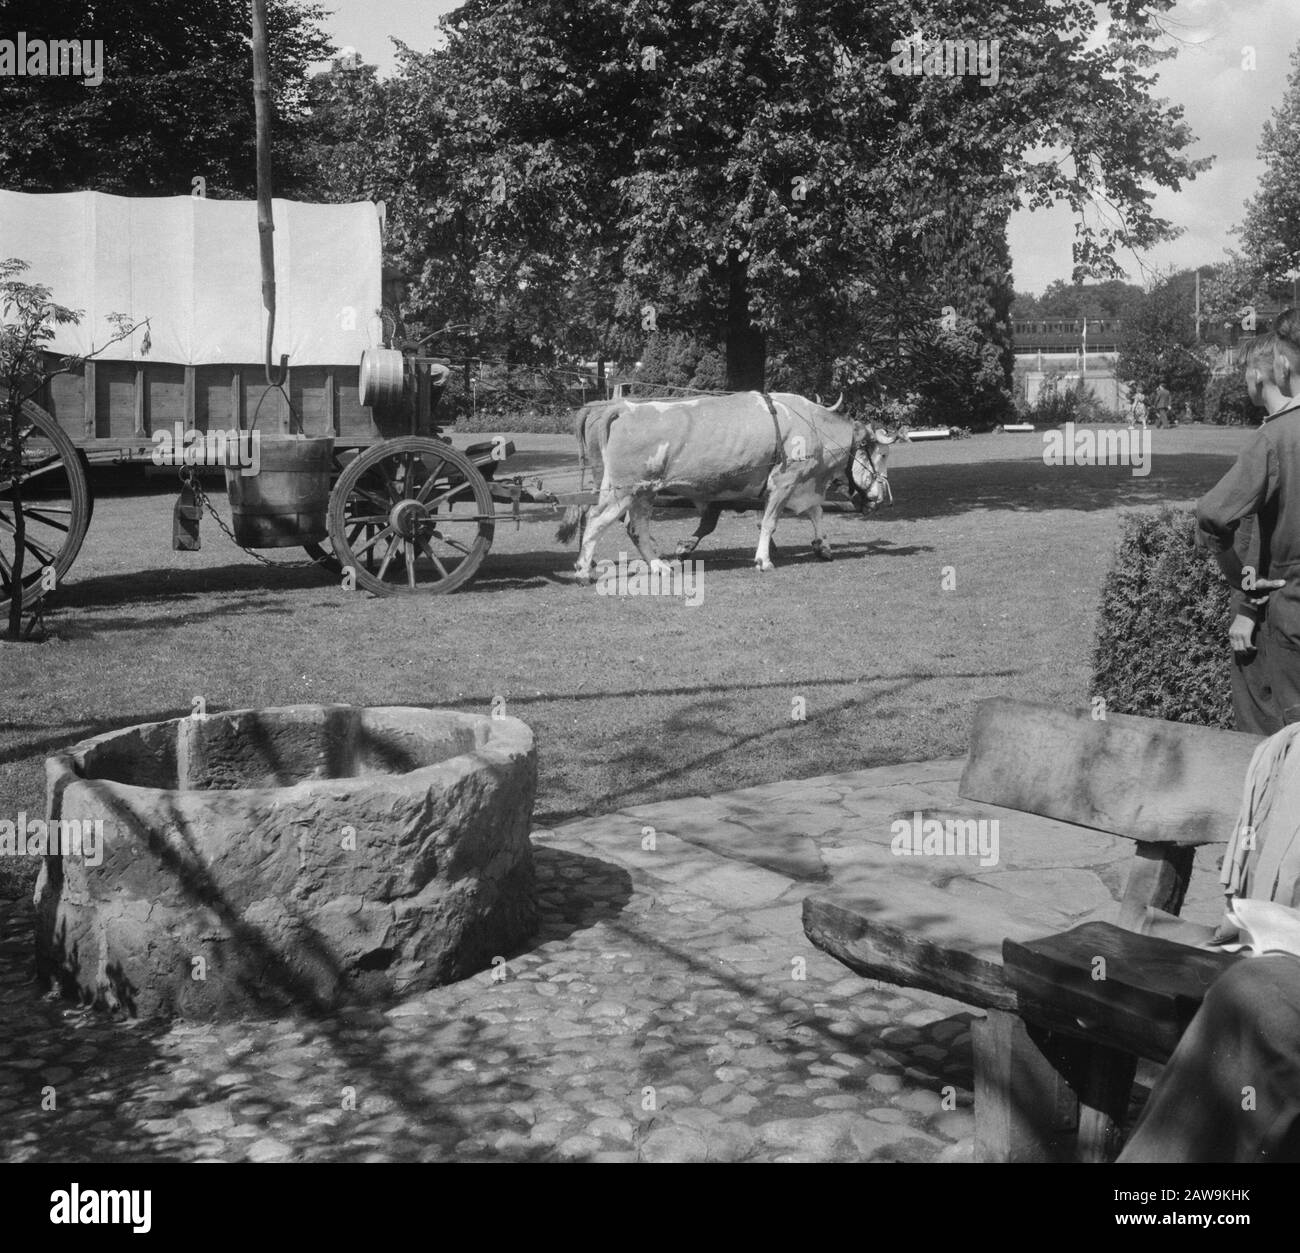 Shooting FF exhibition in Enschede. Transvaal a farmer with a wagon pulled by oxen Date: August 23, 1951 Location: Enschede, Overijssel Keywords: exhibitions vehicles Stock Photo